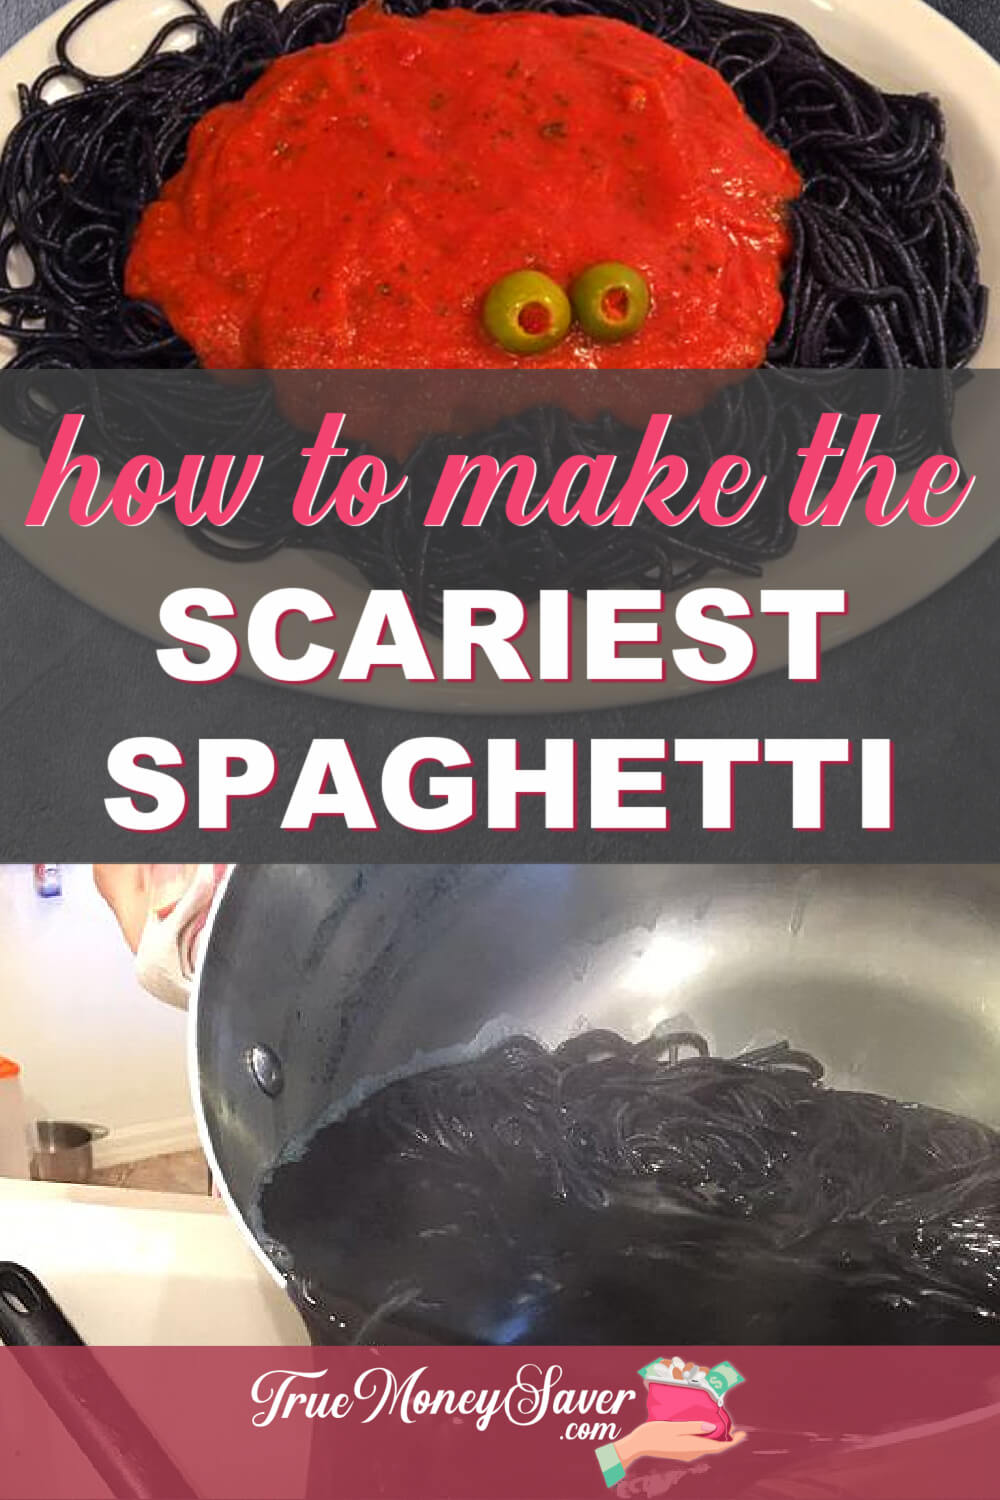 How To Make The Scariest Spaghetti Sauce Dinner For Halloween